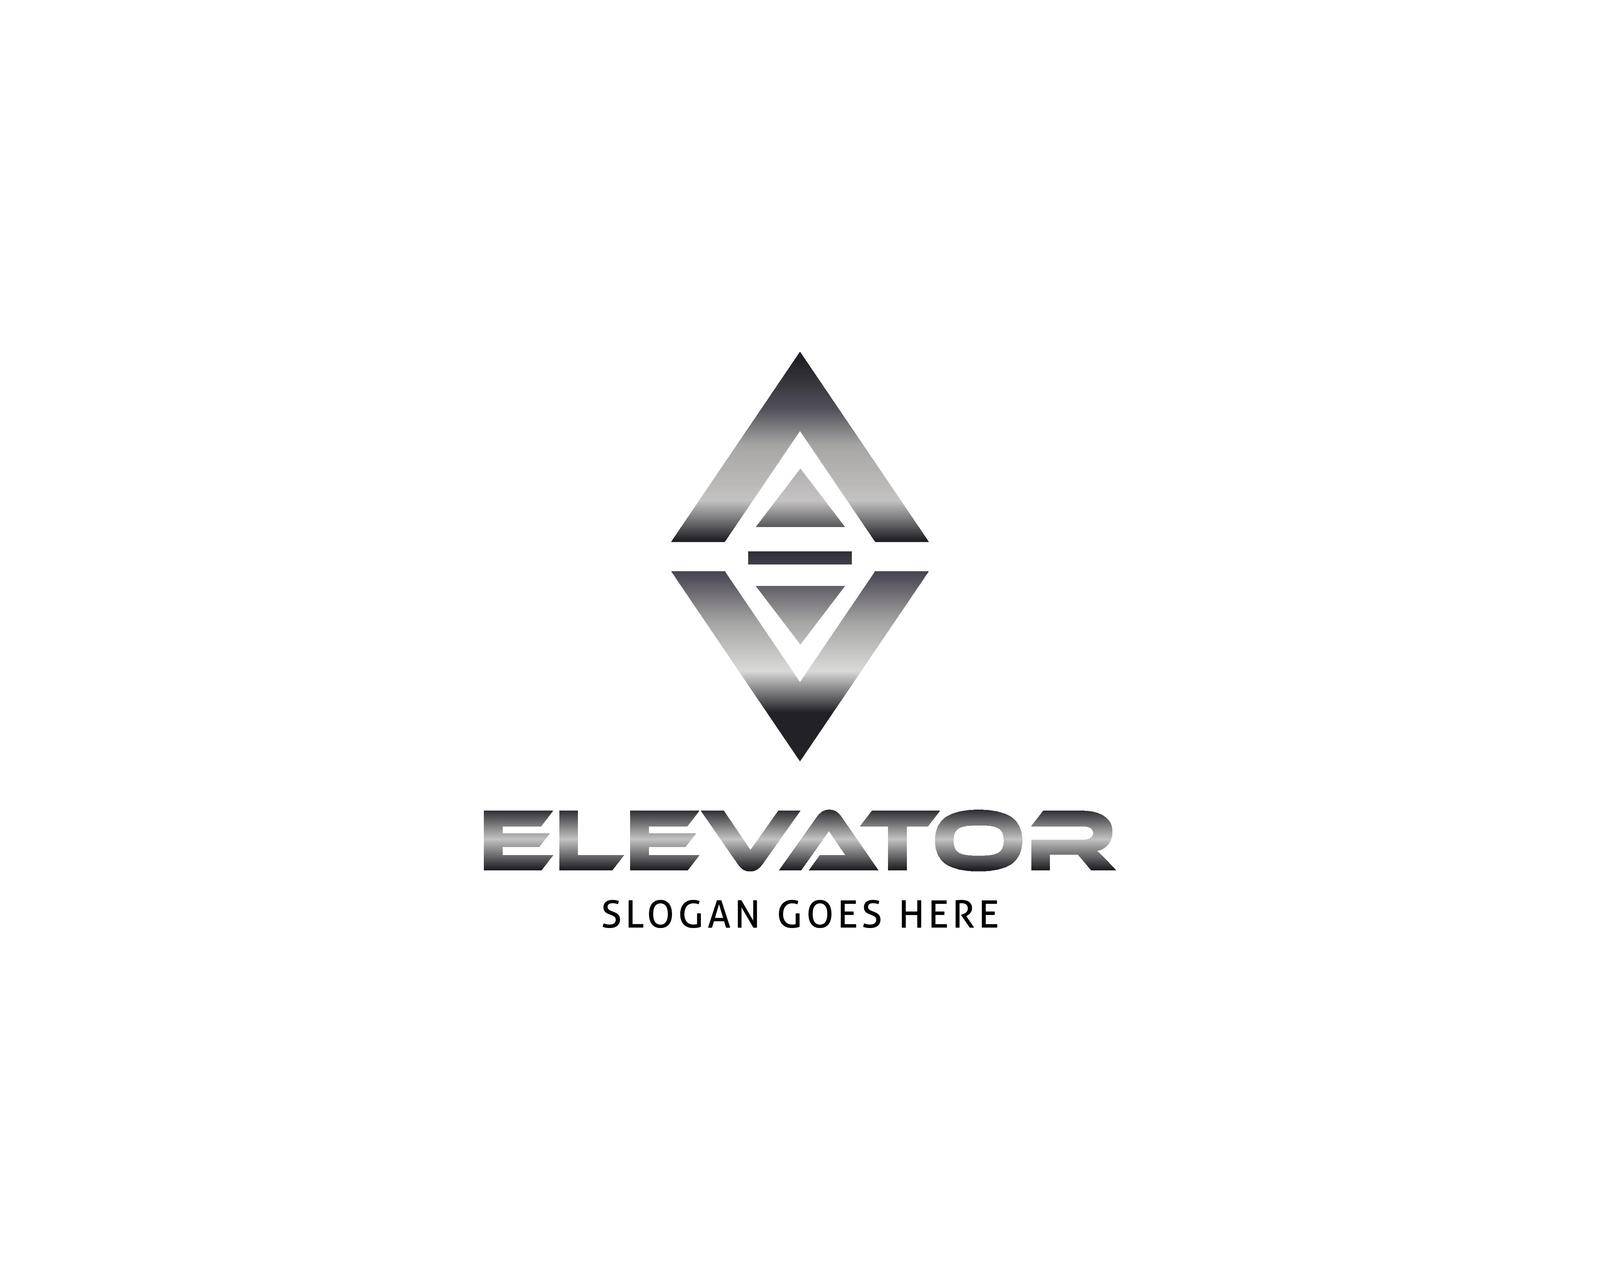 Lift or elevator logo vector template by meisuseno